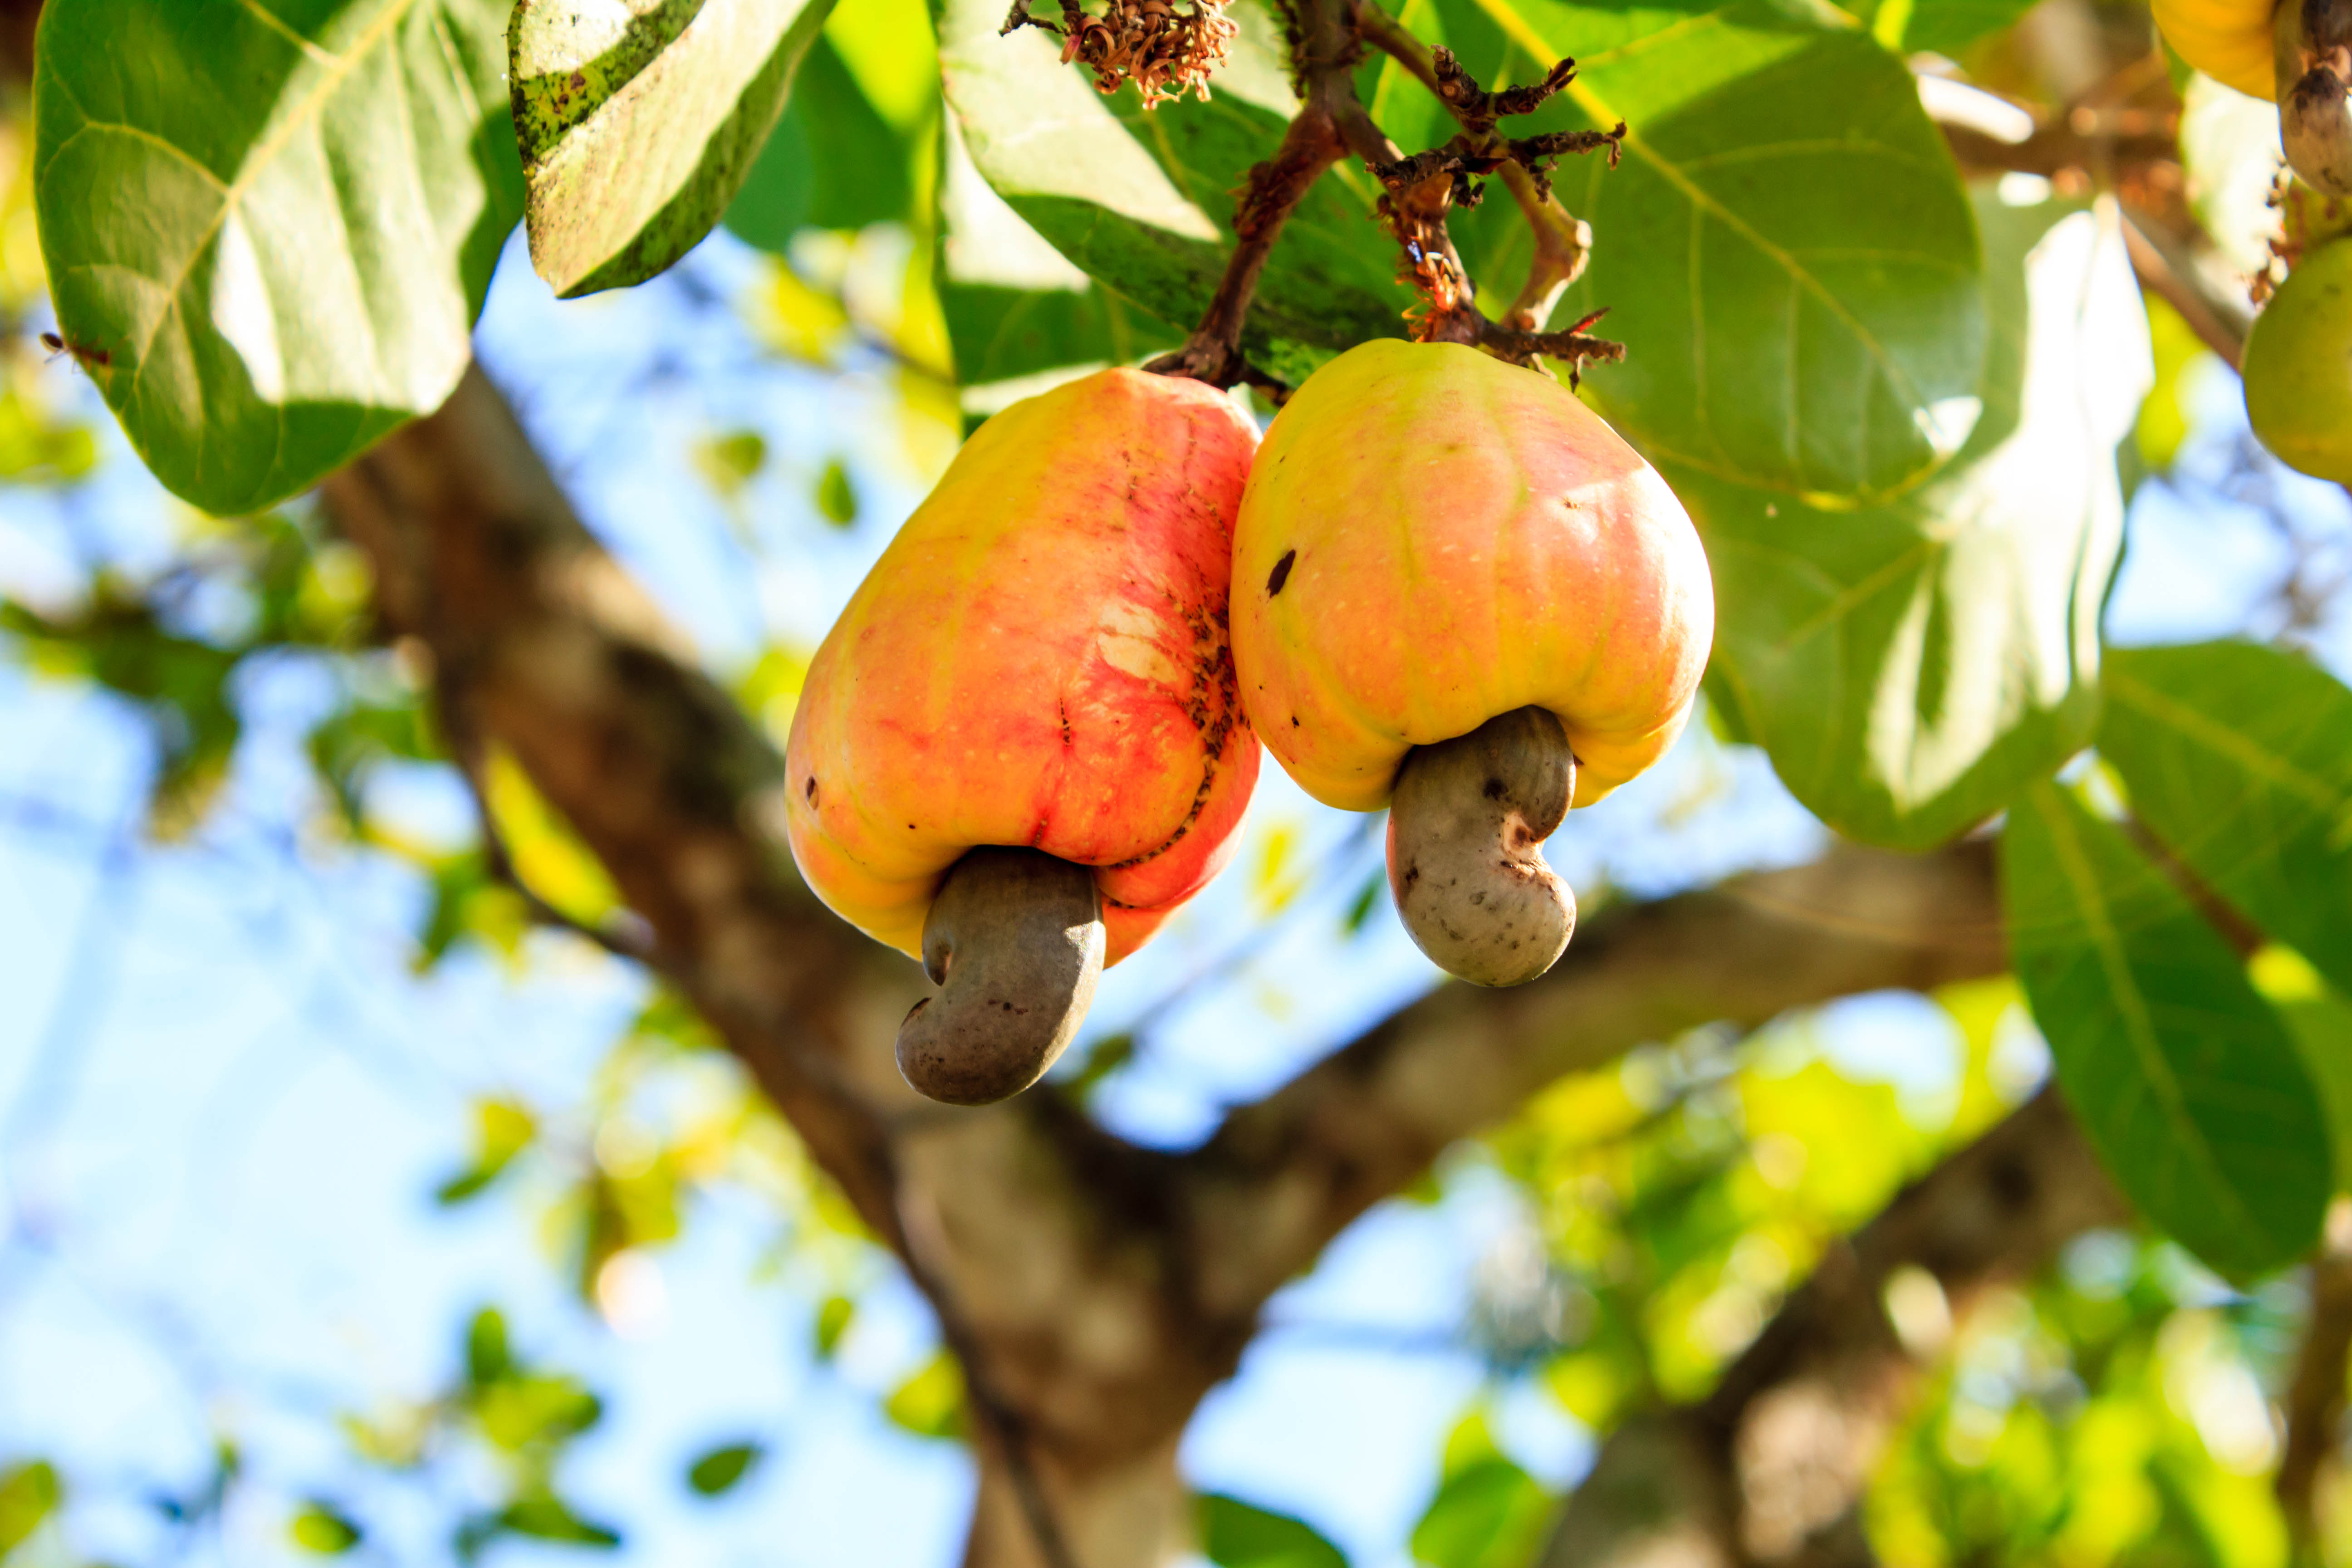 Cashew nuts growing on a tree This extraordinary nut grows outside the fruit